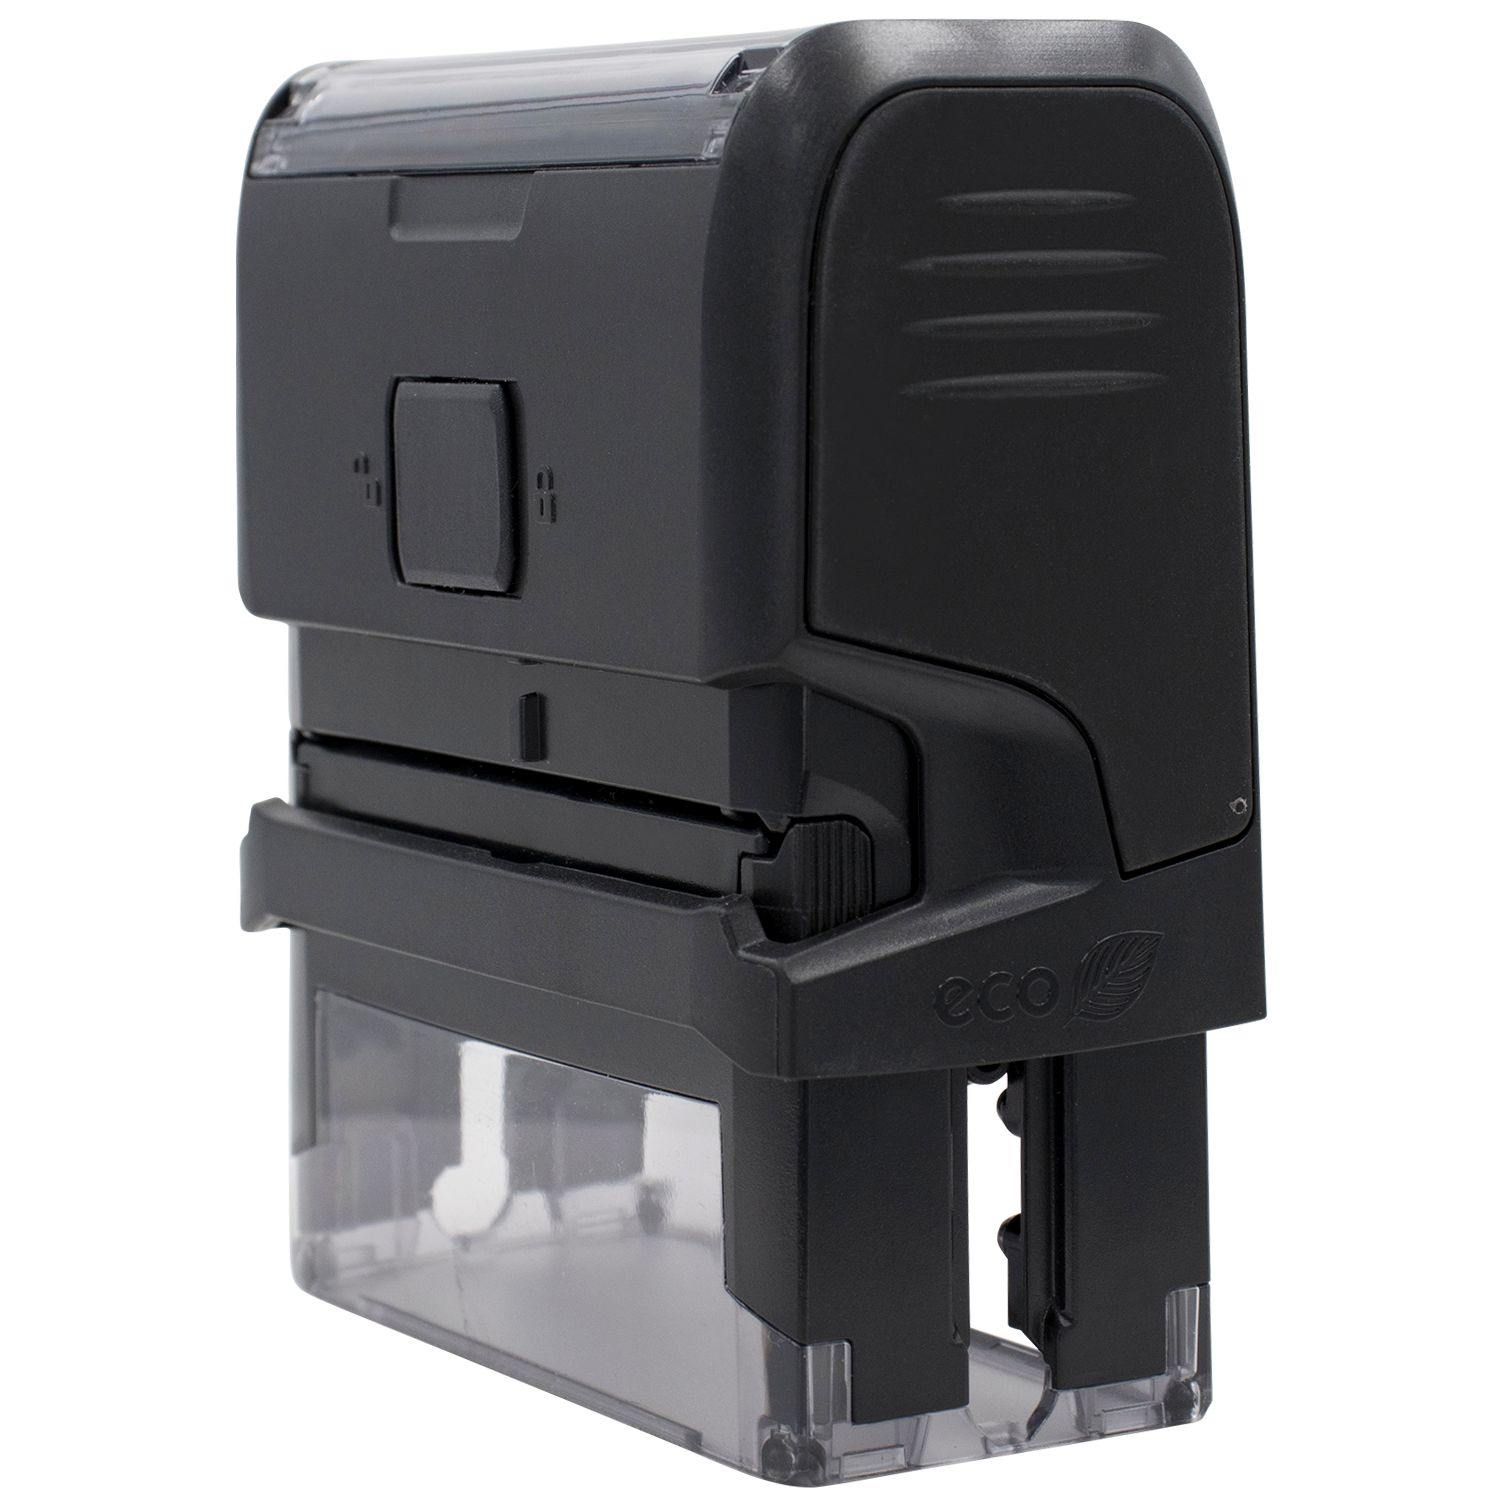 Side View of Large Self Inking Advanced Placement Stamp at an Angle